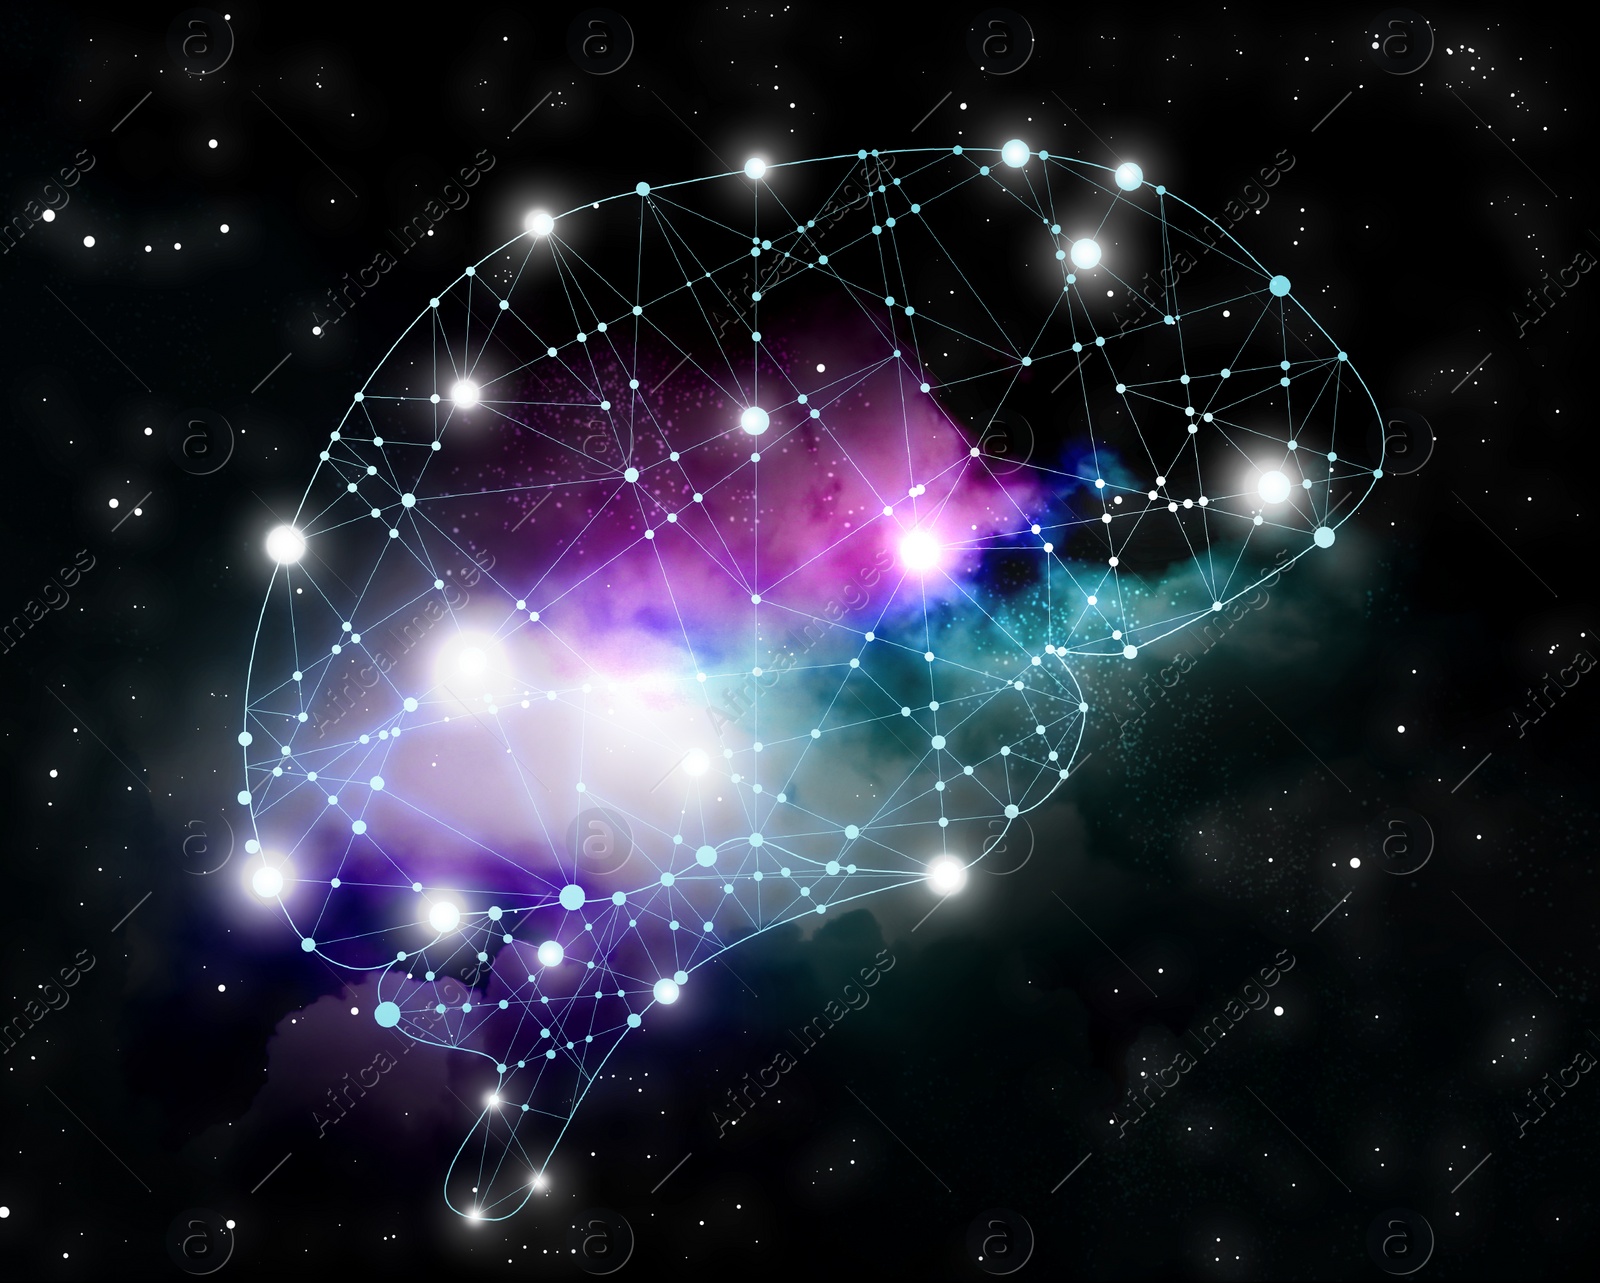 Illustration of  human brain and space on background